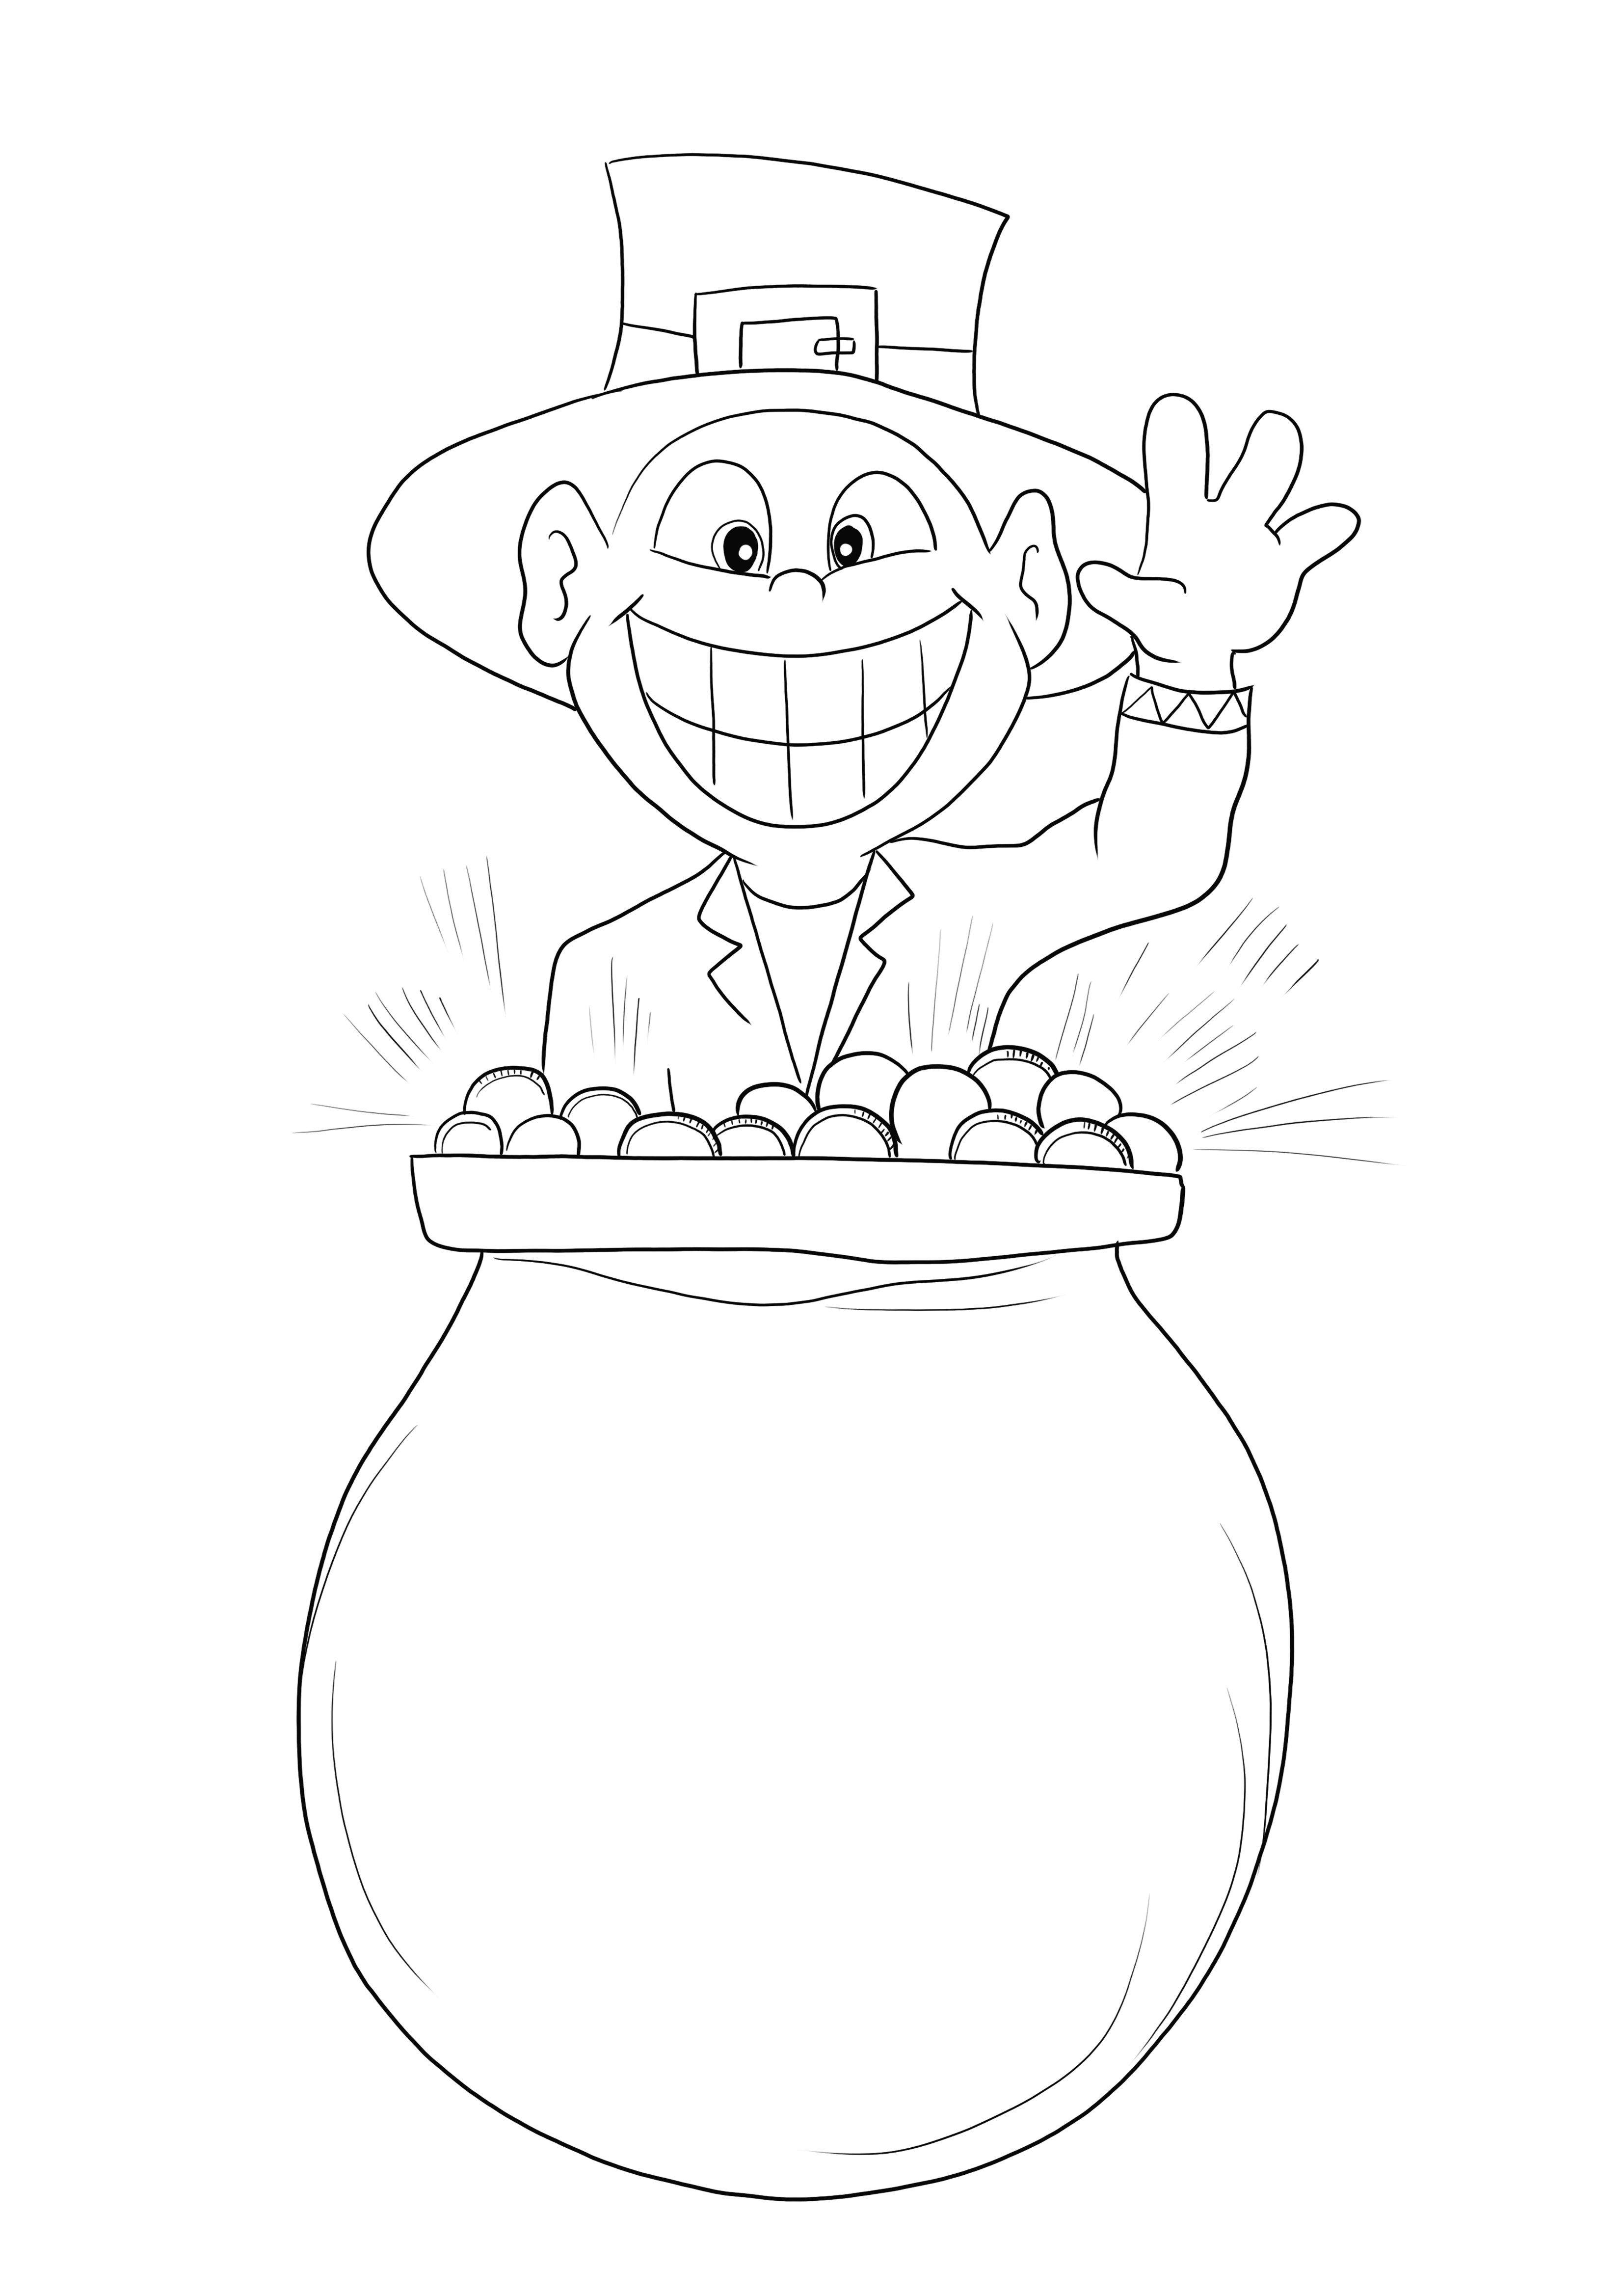 Our free printable coloring image of the Pot of Gold is ready to be colored